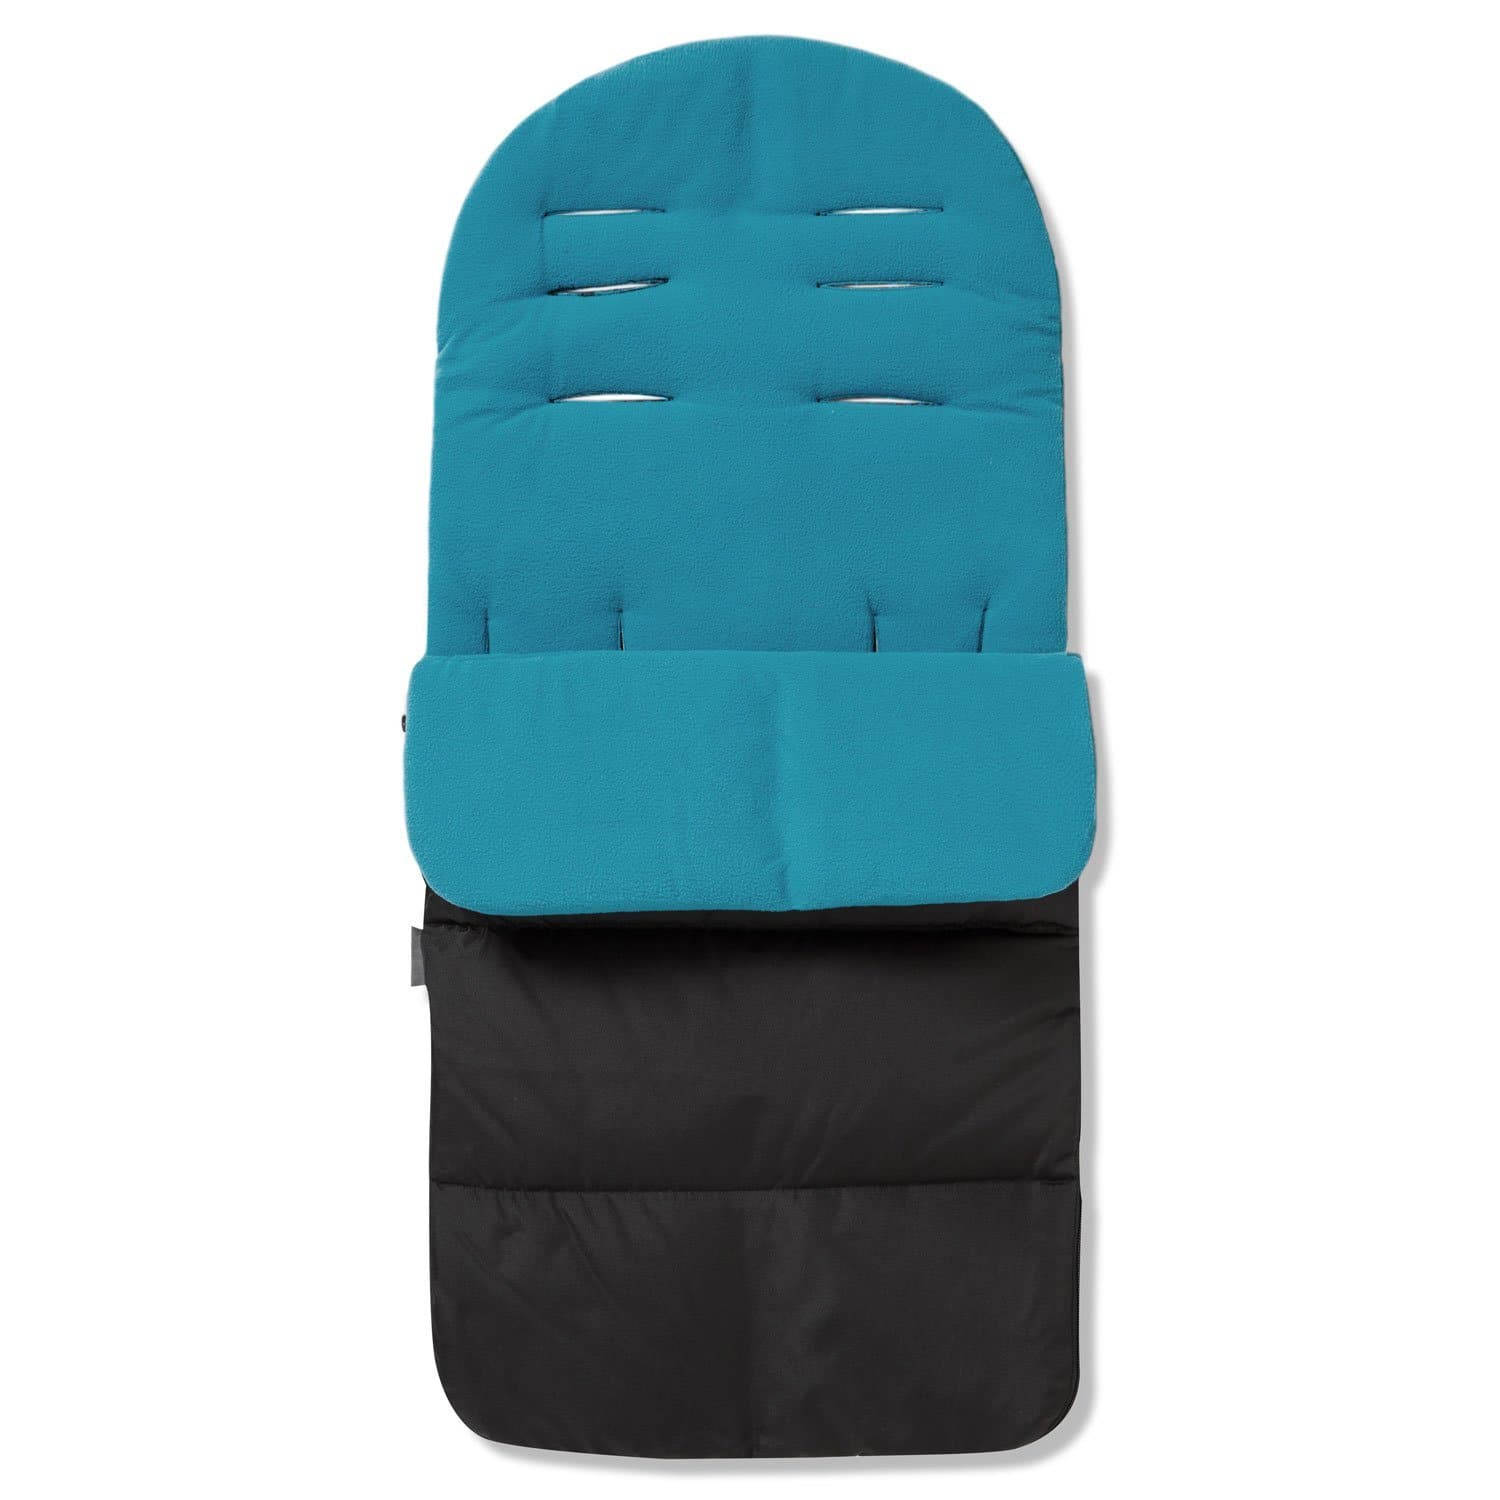 Premium Footmuff / Cosy Toes Compatible with Babystyle - Ocean Blue / Fits All Models | For Your Little One